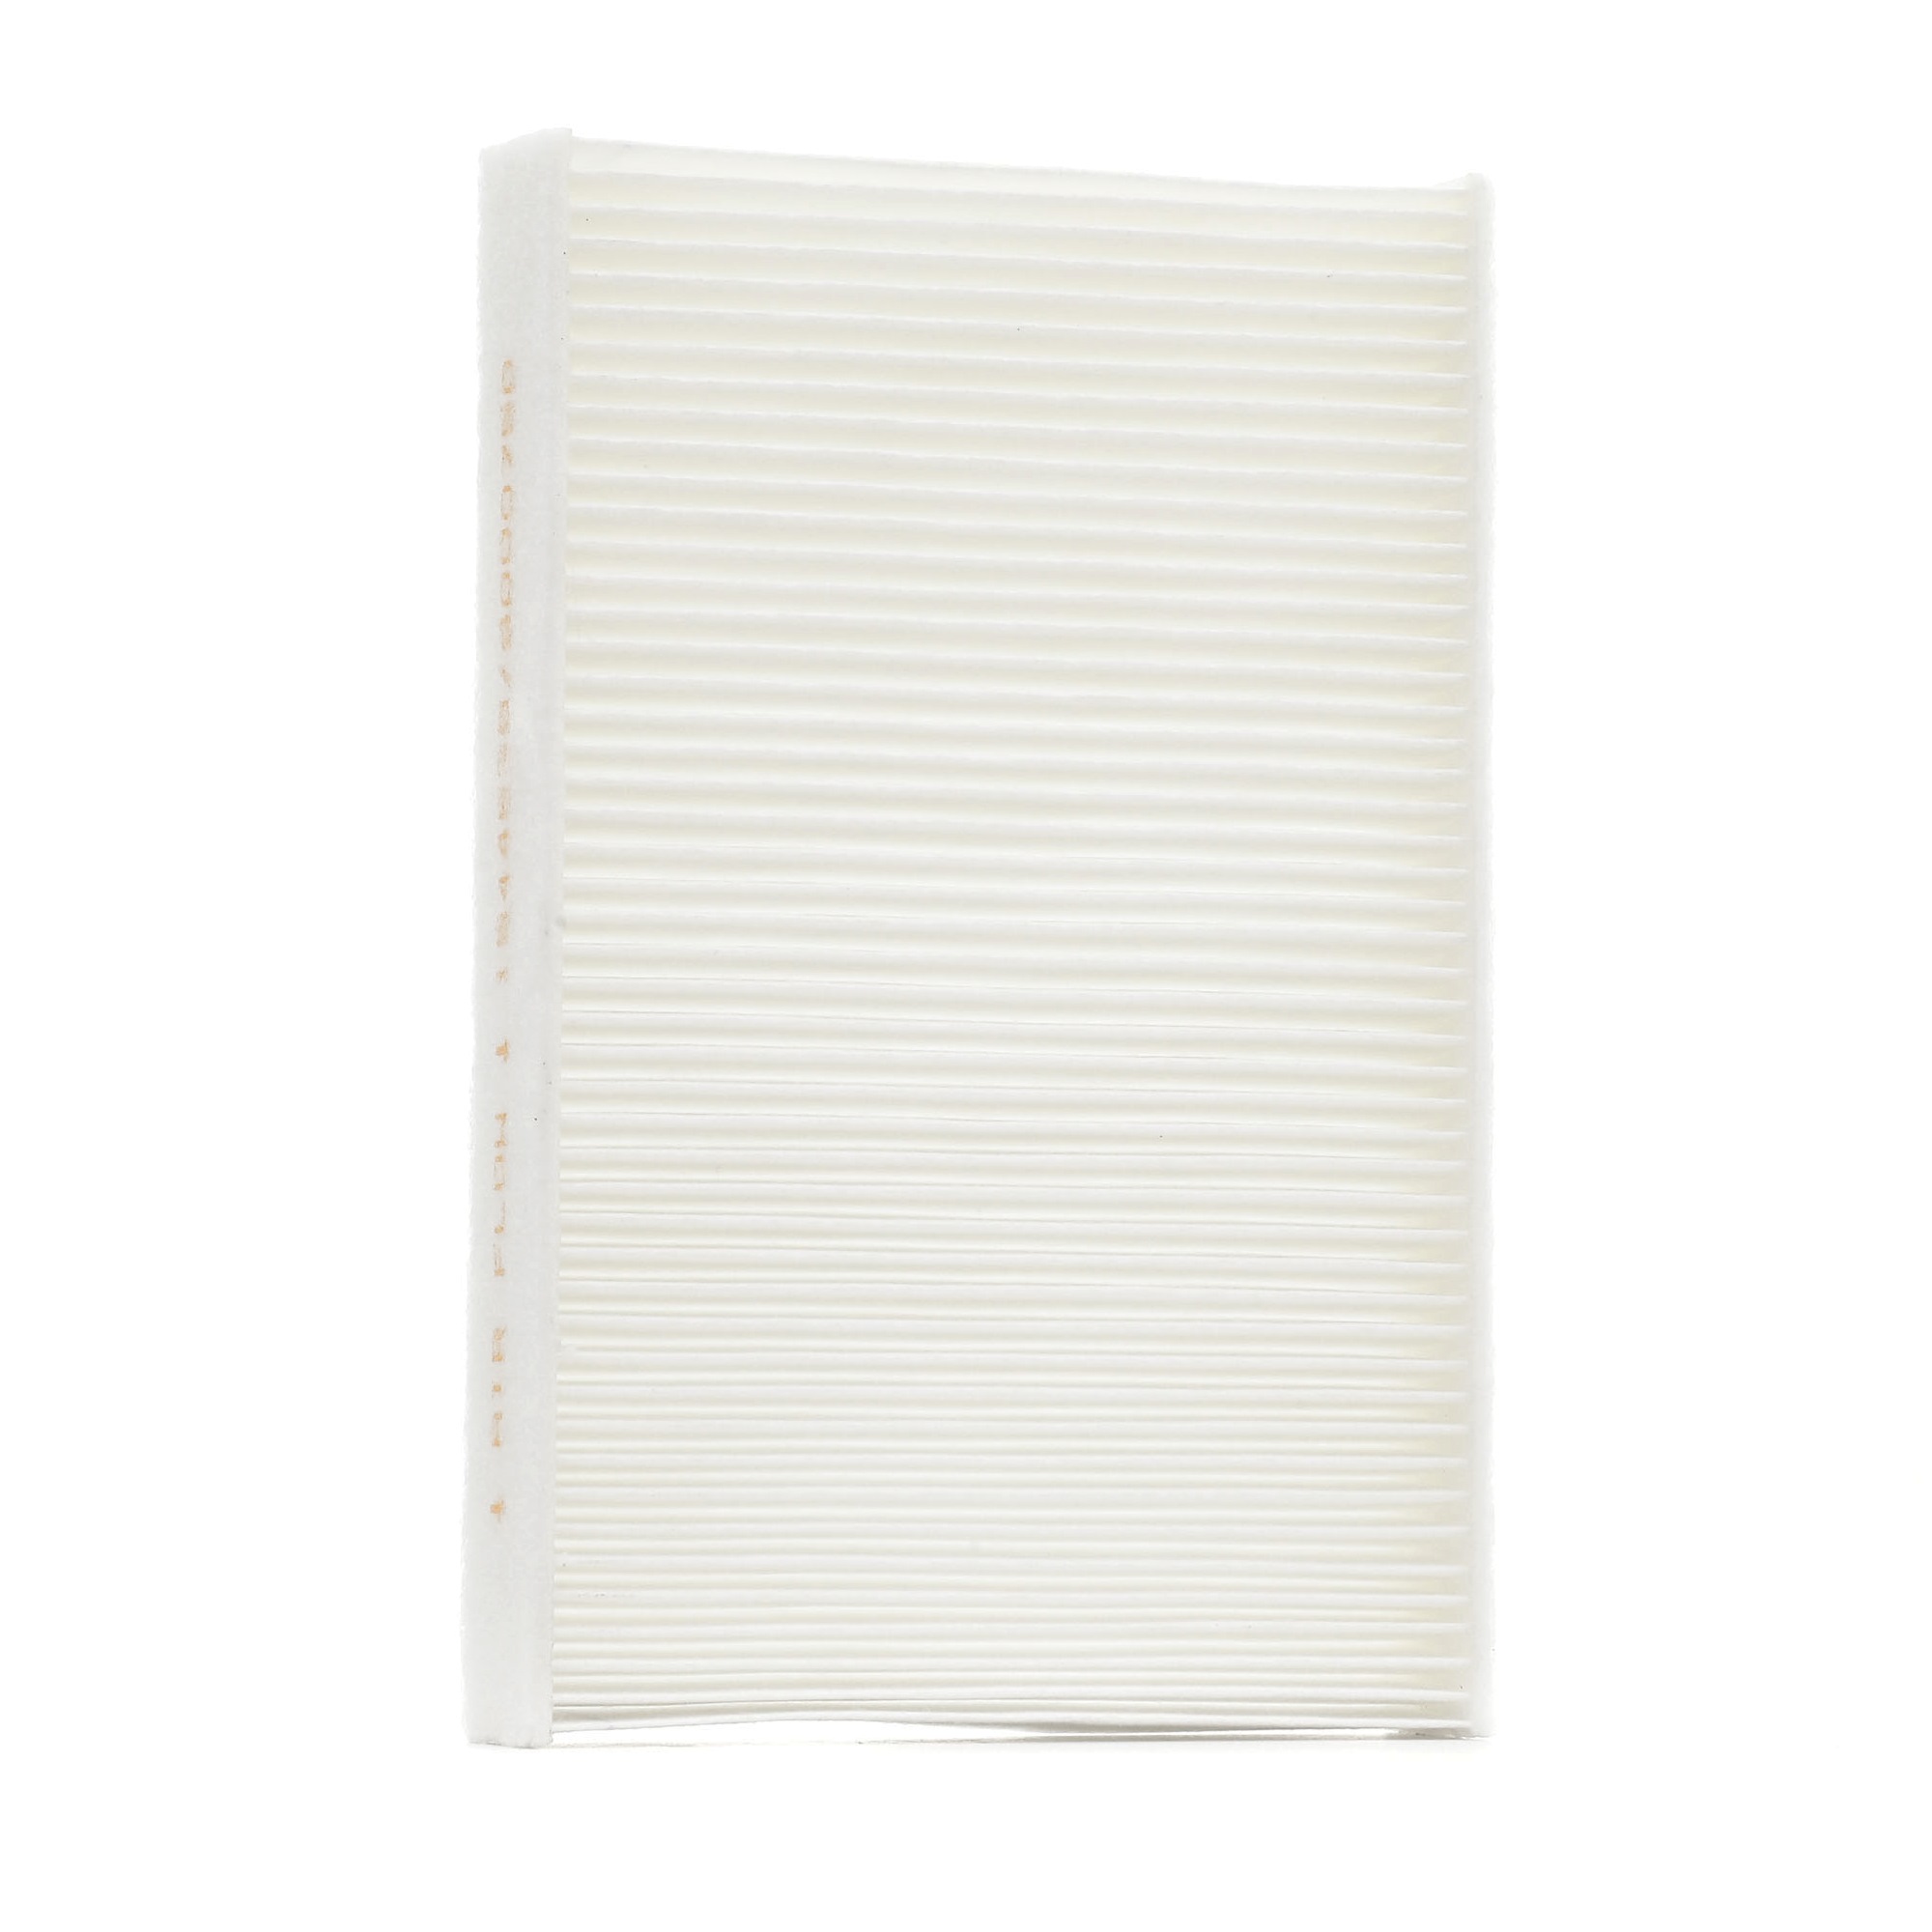 Renault TWINGO Air conditioning filter 8000750 RIDEX 424I0300 online buy